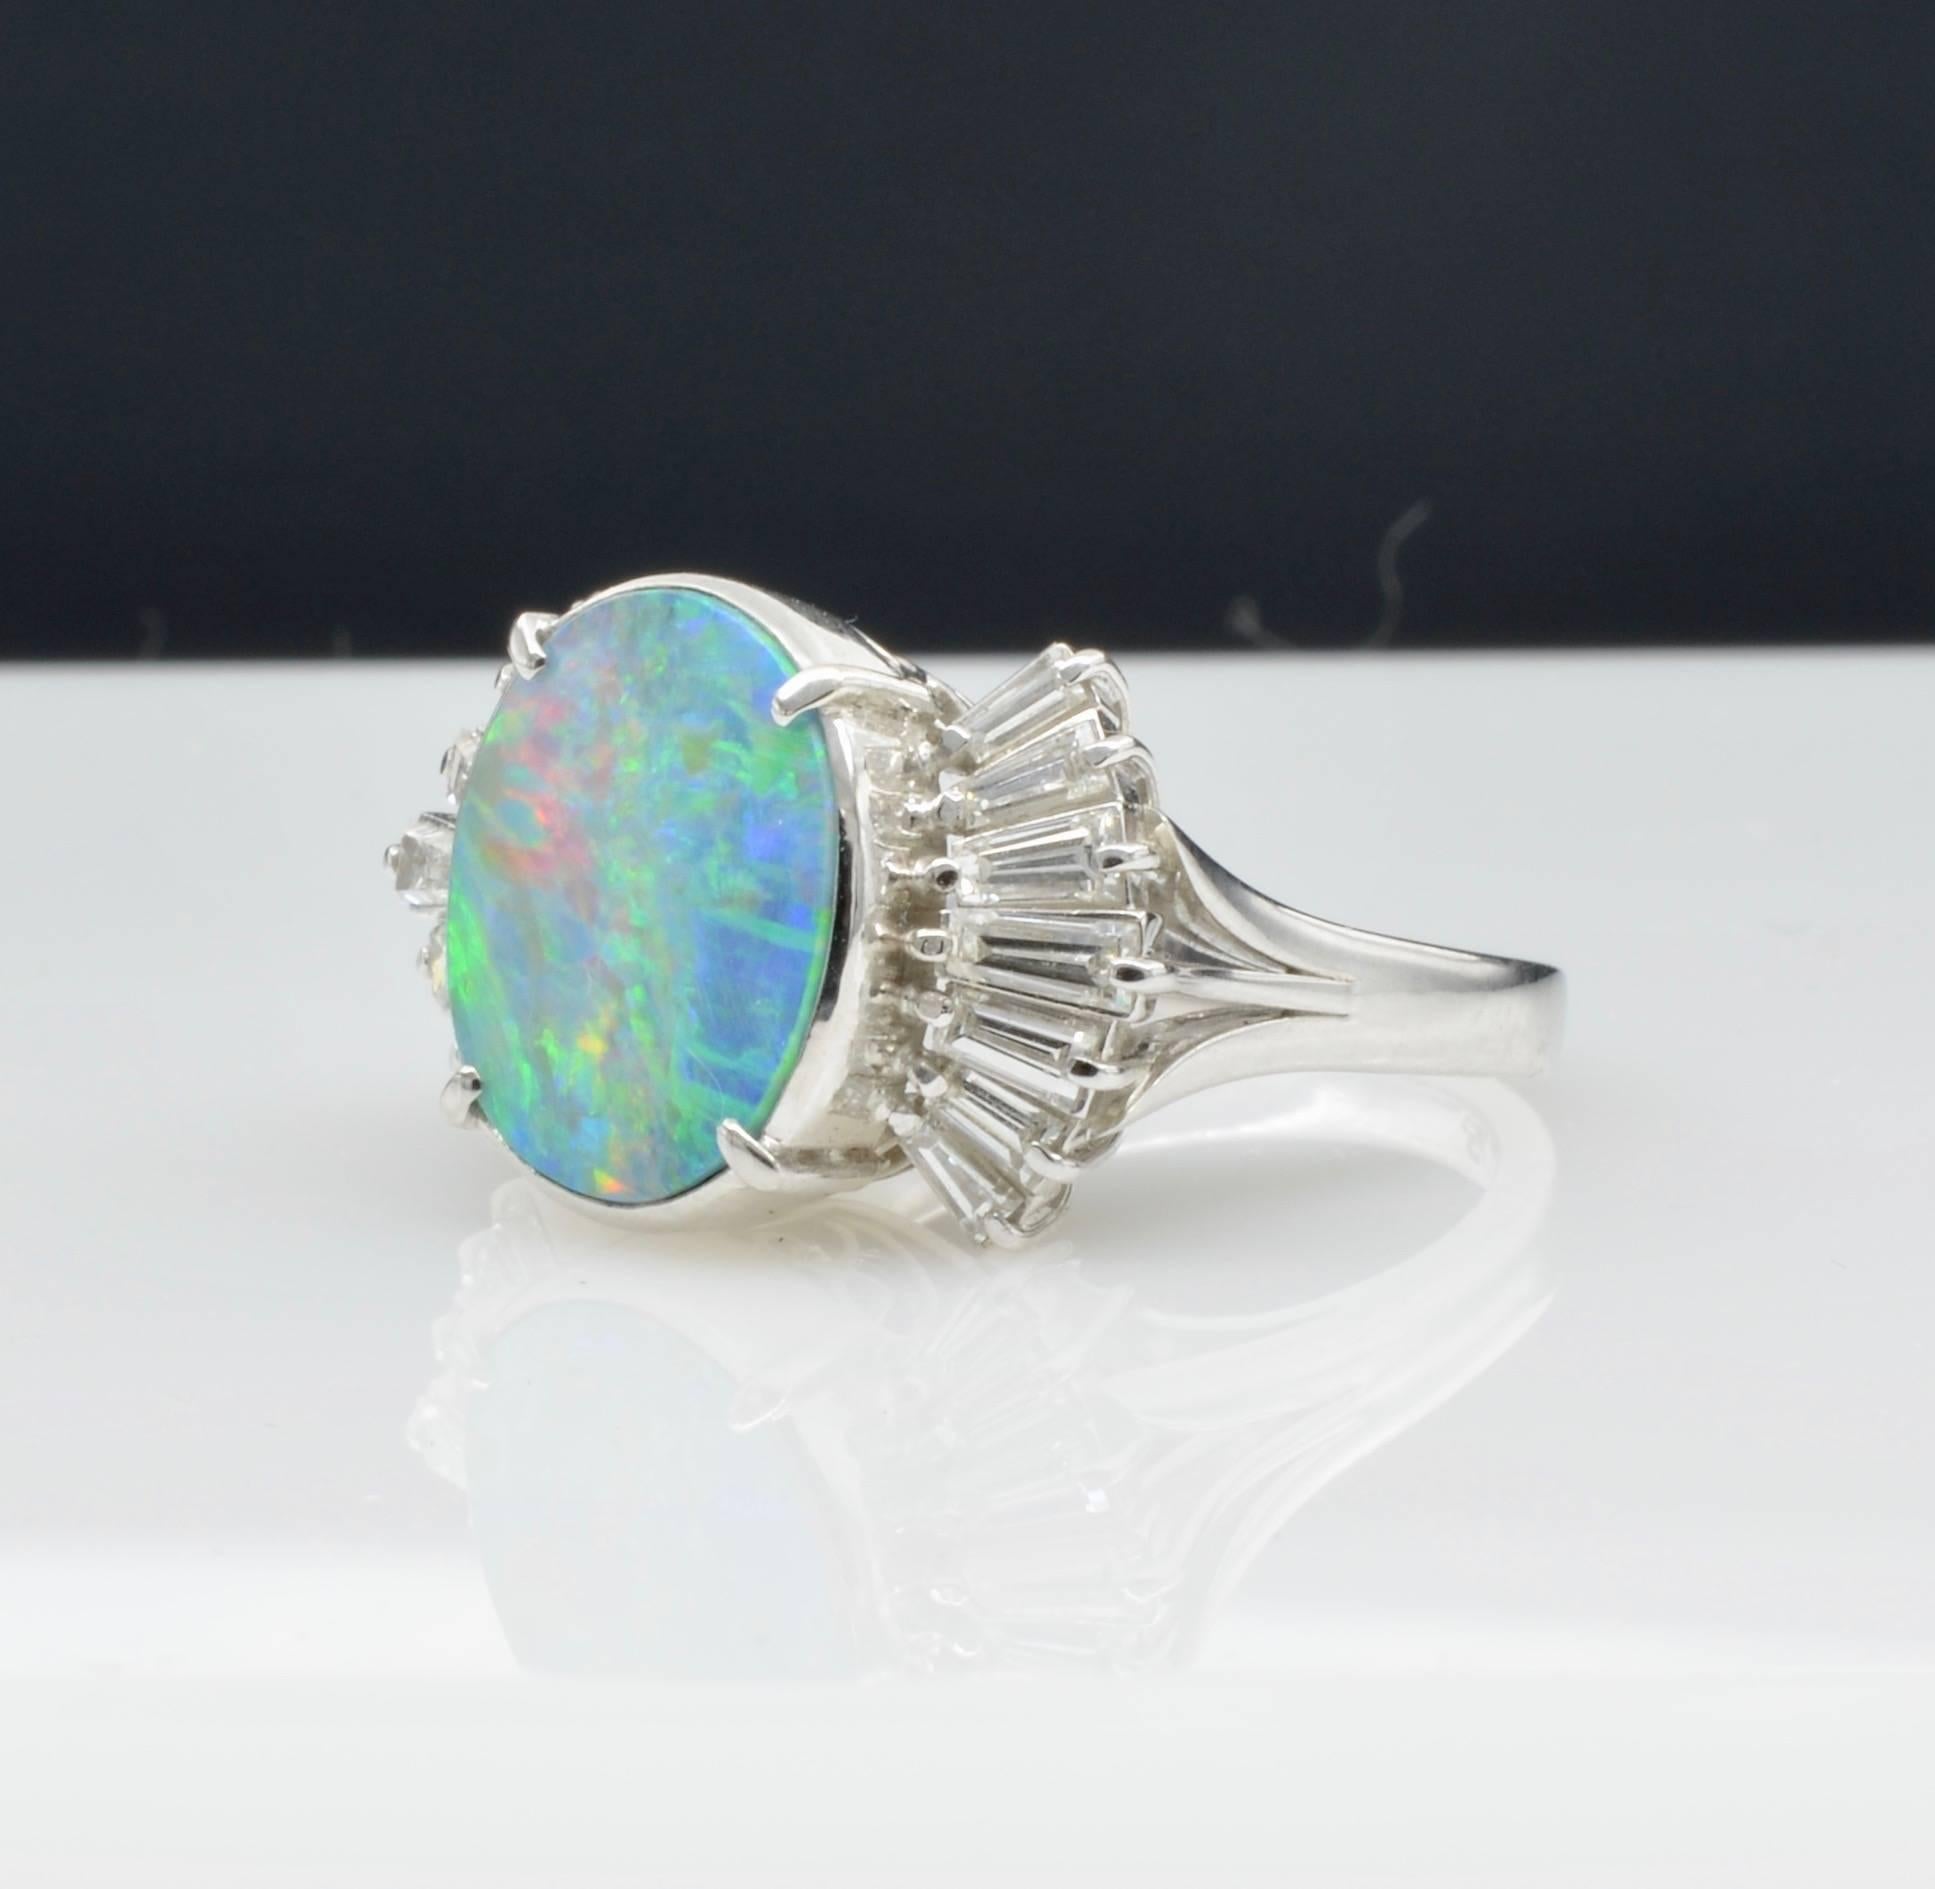 This stunner is a radiant doublet opal aprox. 4.68 ct. surrounded by 0.78 ct diamond baguettes set in platinum. An amazing example of 1970's design and influence. The ring size is 6 1/4 and can be sized to fit your finger.